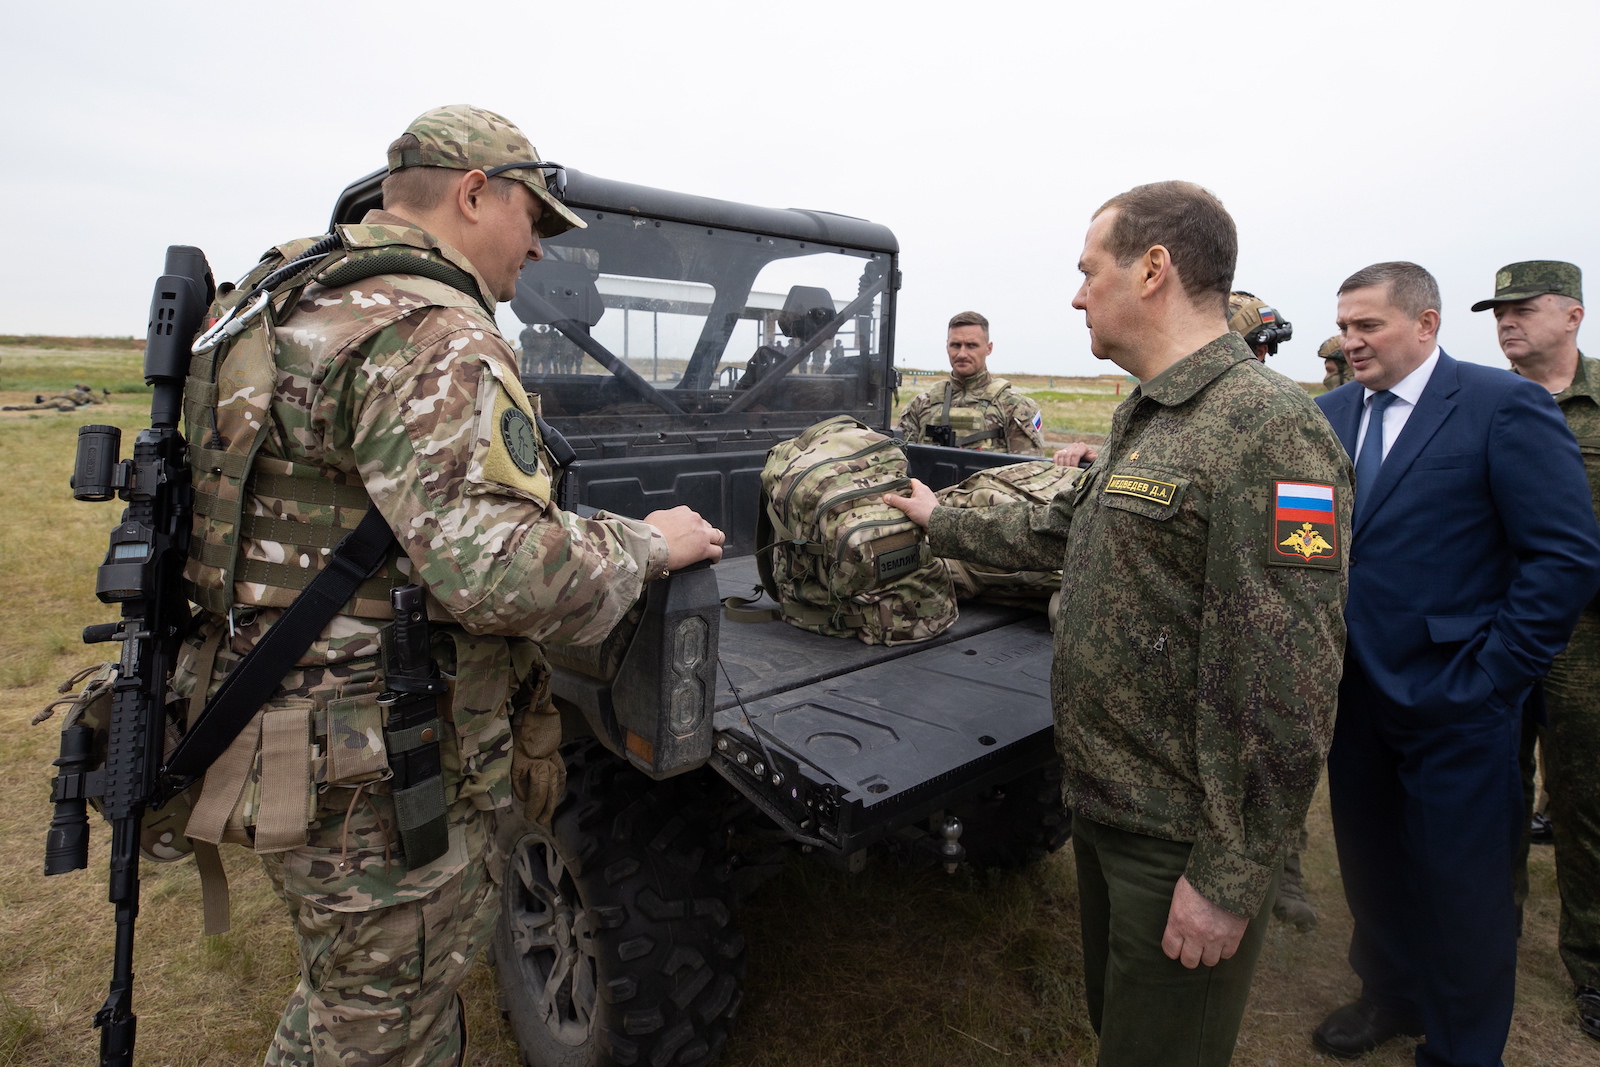 epa10667368 Dmitry Medvedev (C), Deputy head of Russia's Security Council and chairman of the United Russia party, visits the Prudboi military training ground in Volgograd region, Russia, 01 June 2023.  EPA/EKATERINA SHTUKINA / GOVERNMENT PRESS SERVICE / POOL MANDATORY CREDIT